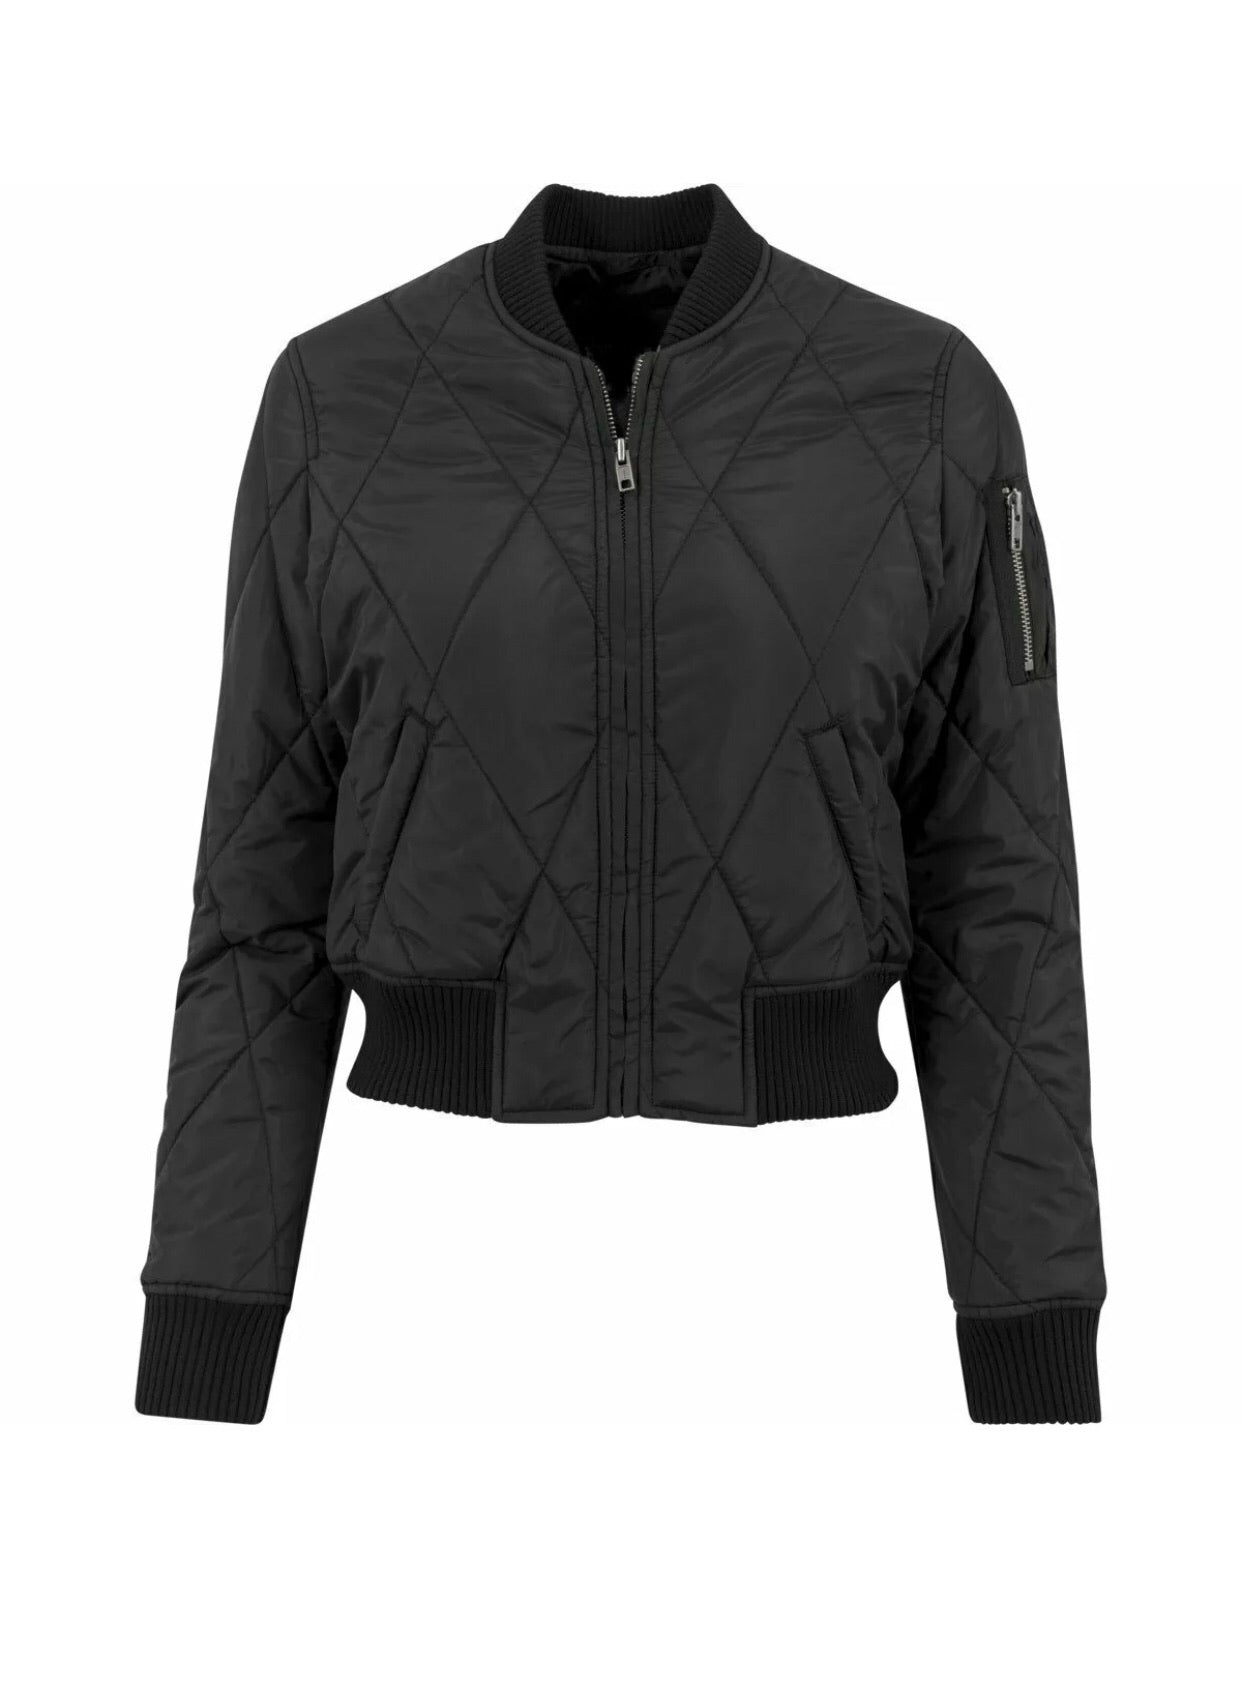 The Women’s Quilted Bomber Jacket - Up to Size XXL